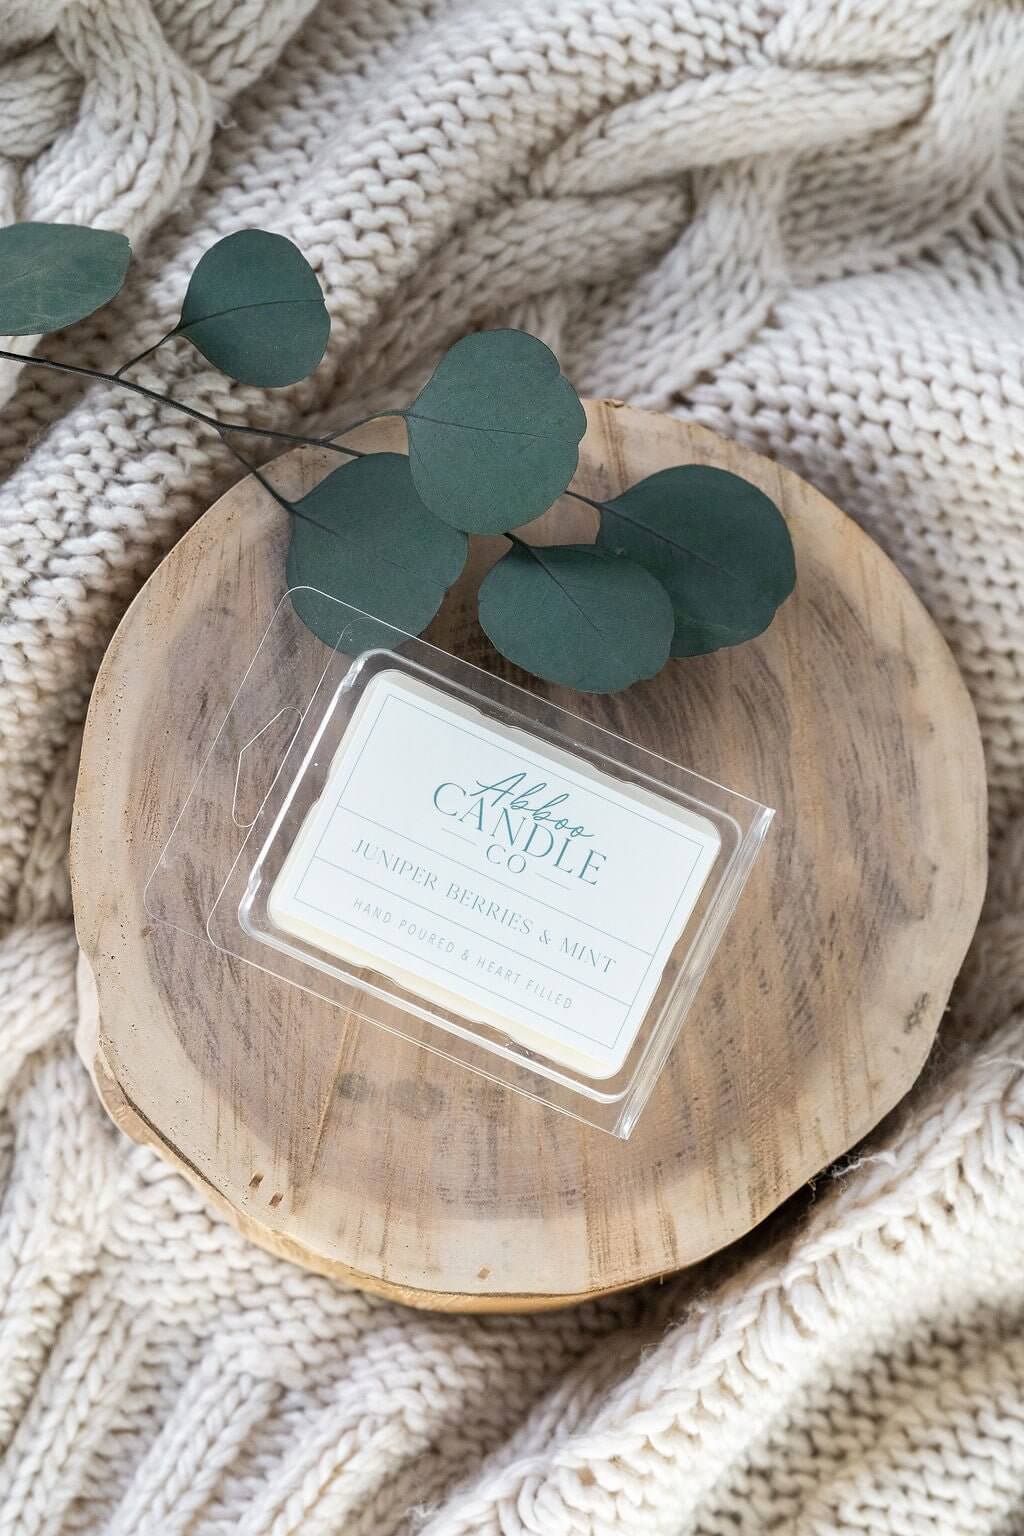 Winter Berries & Mint Soy Wax Melts by Abboo Candle Co